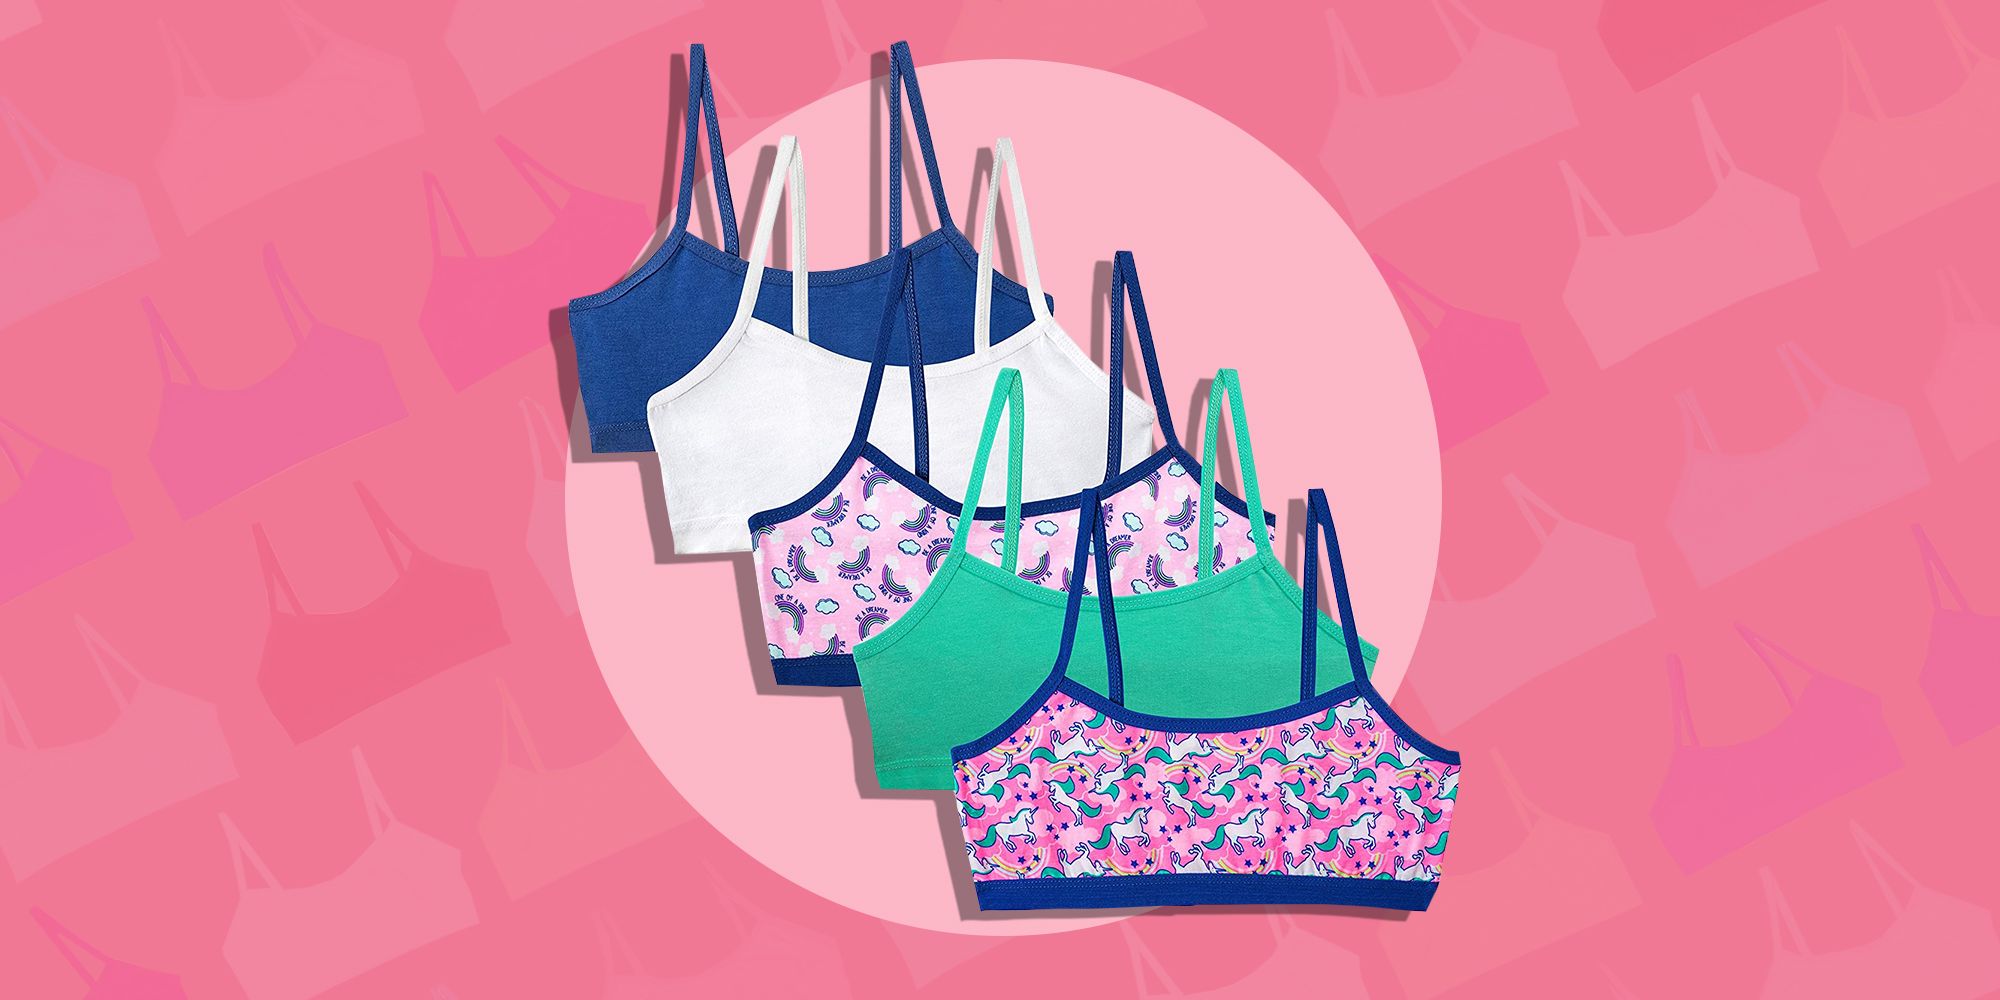 Introducing your teen daughter to her first Bra? Make it a smooth